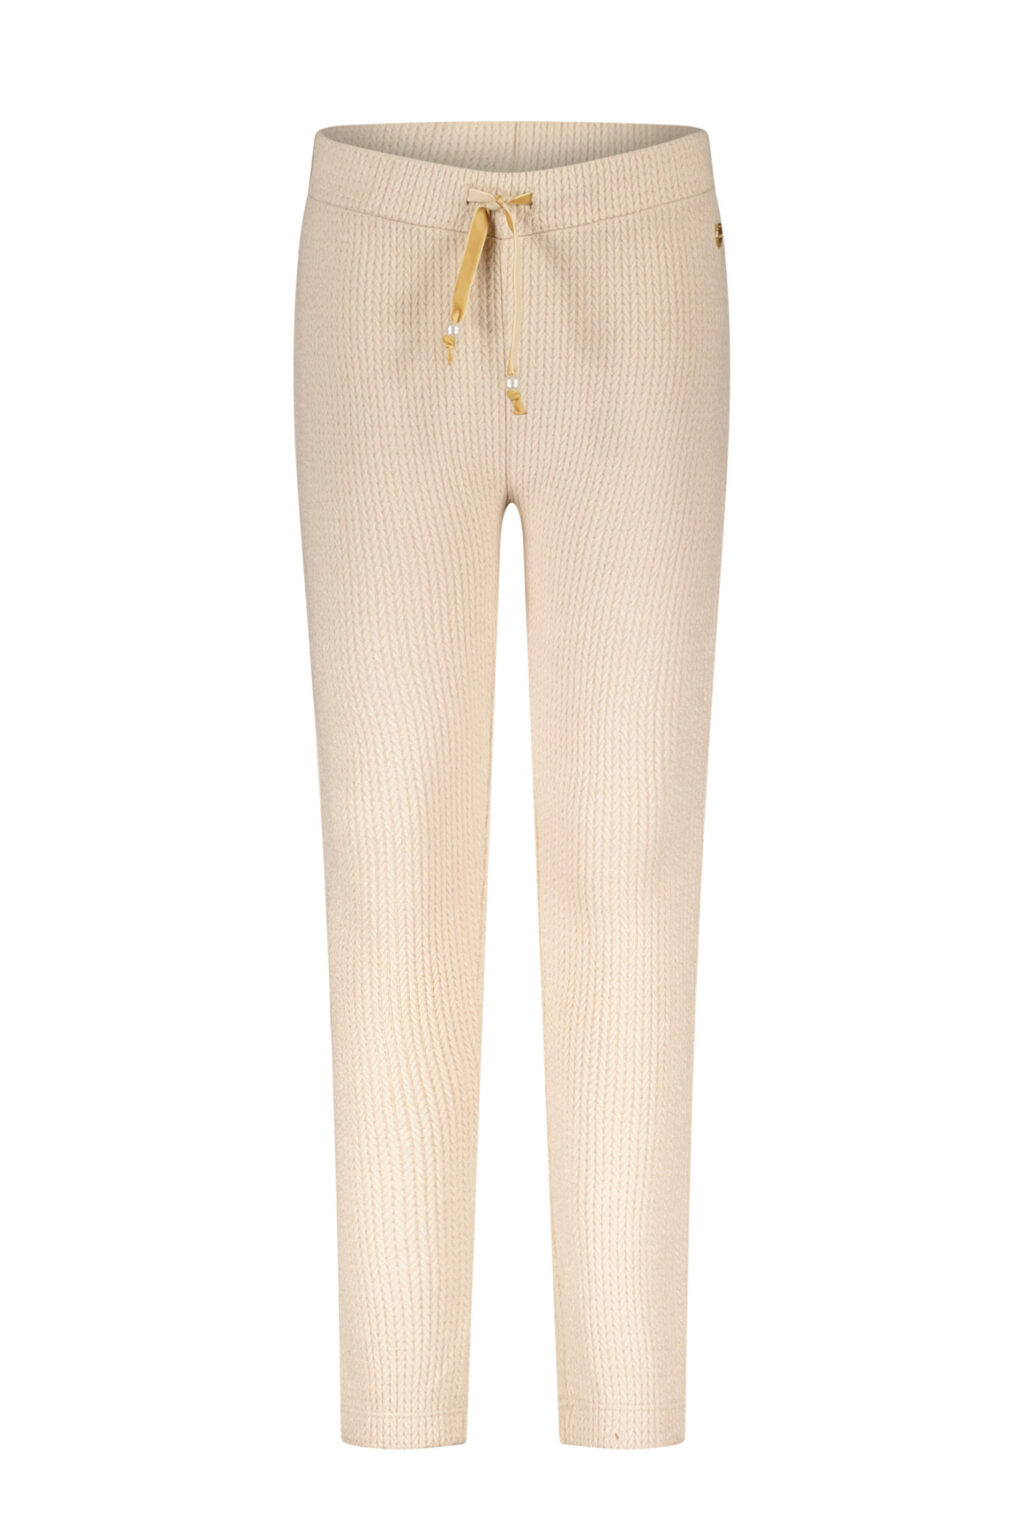 Le Chic Meisjes broek - Dualy - Light cappuccino ~ Spinze.nl